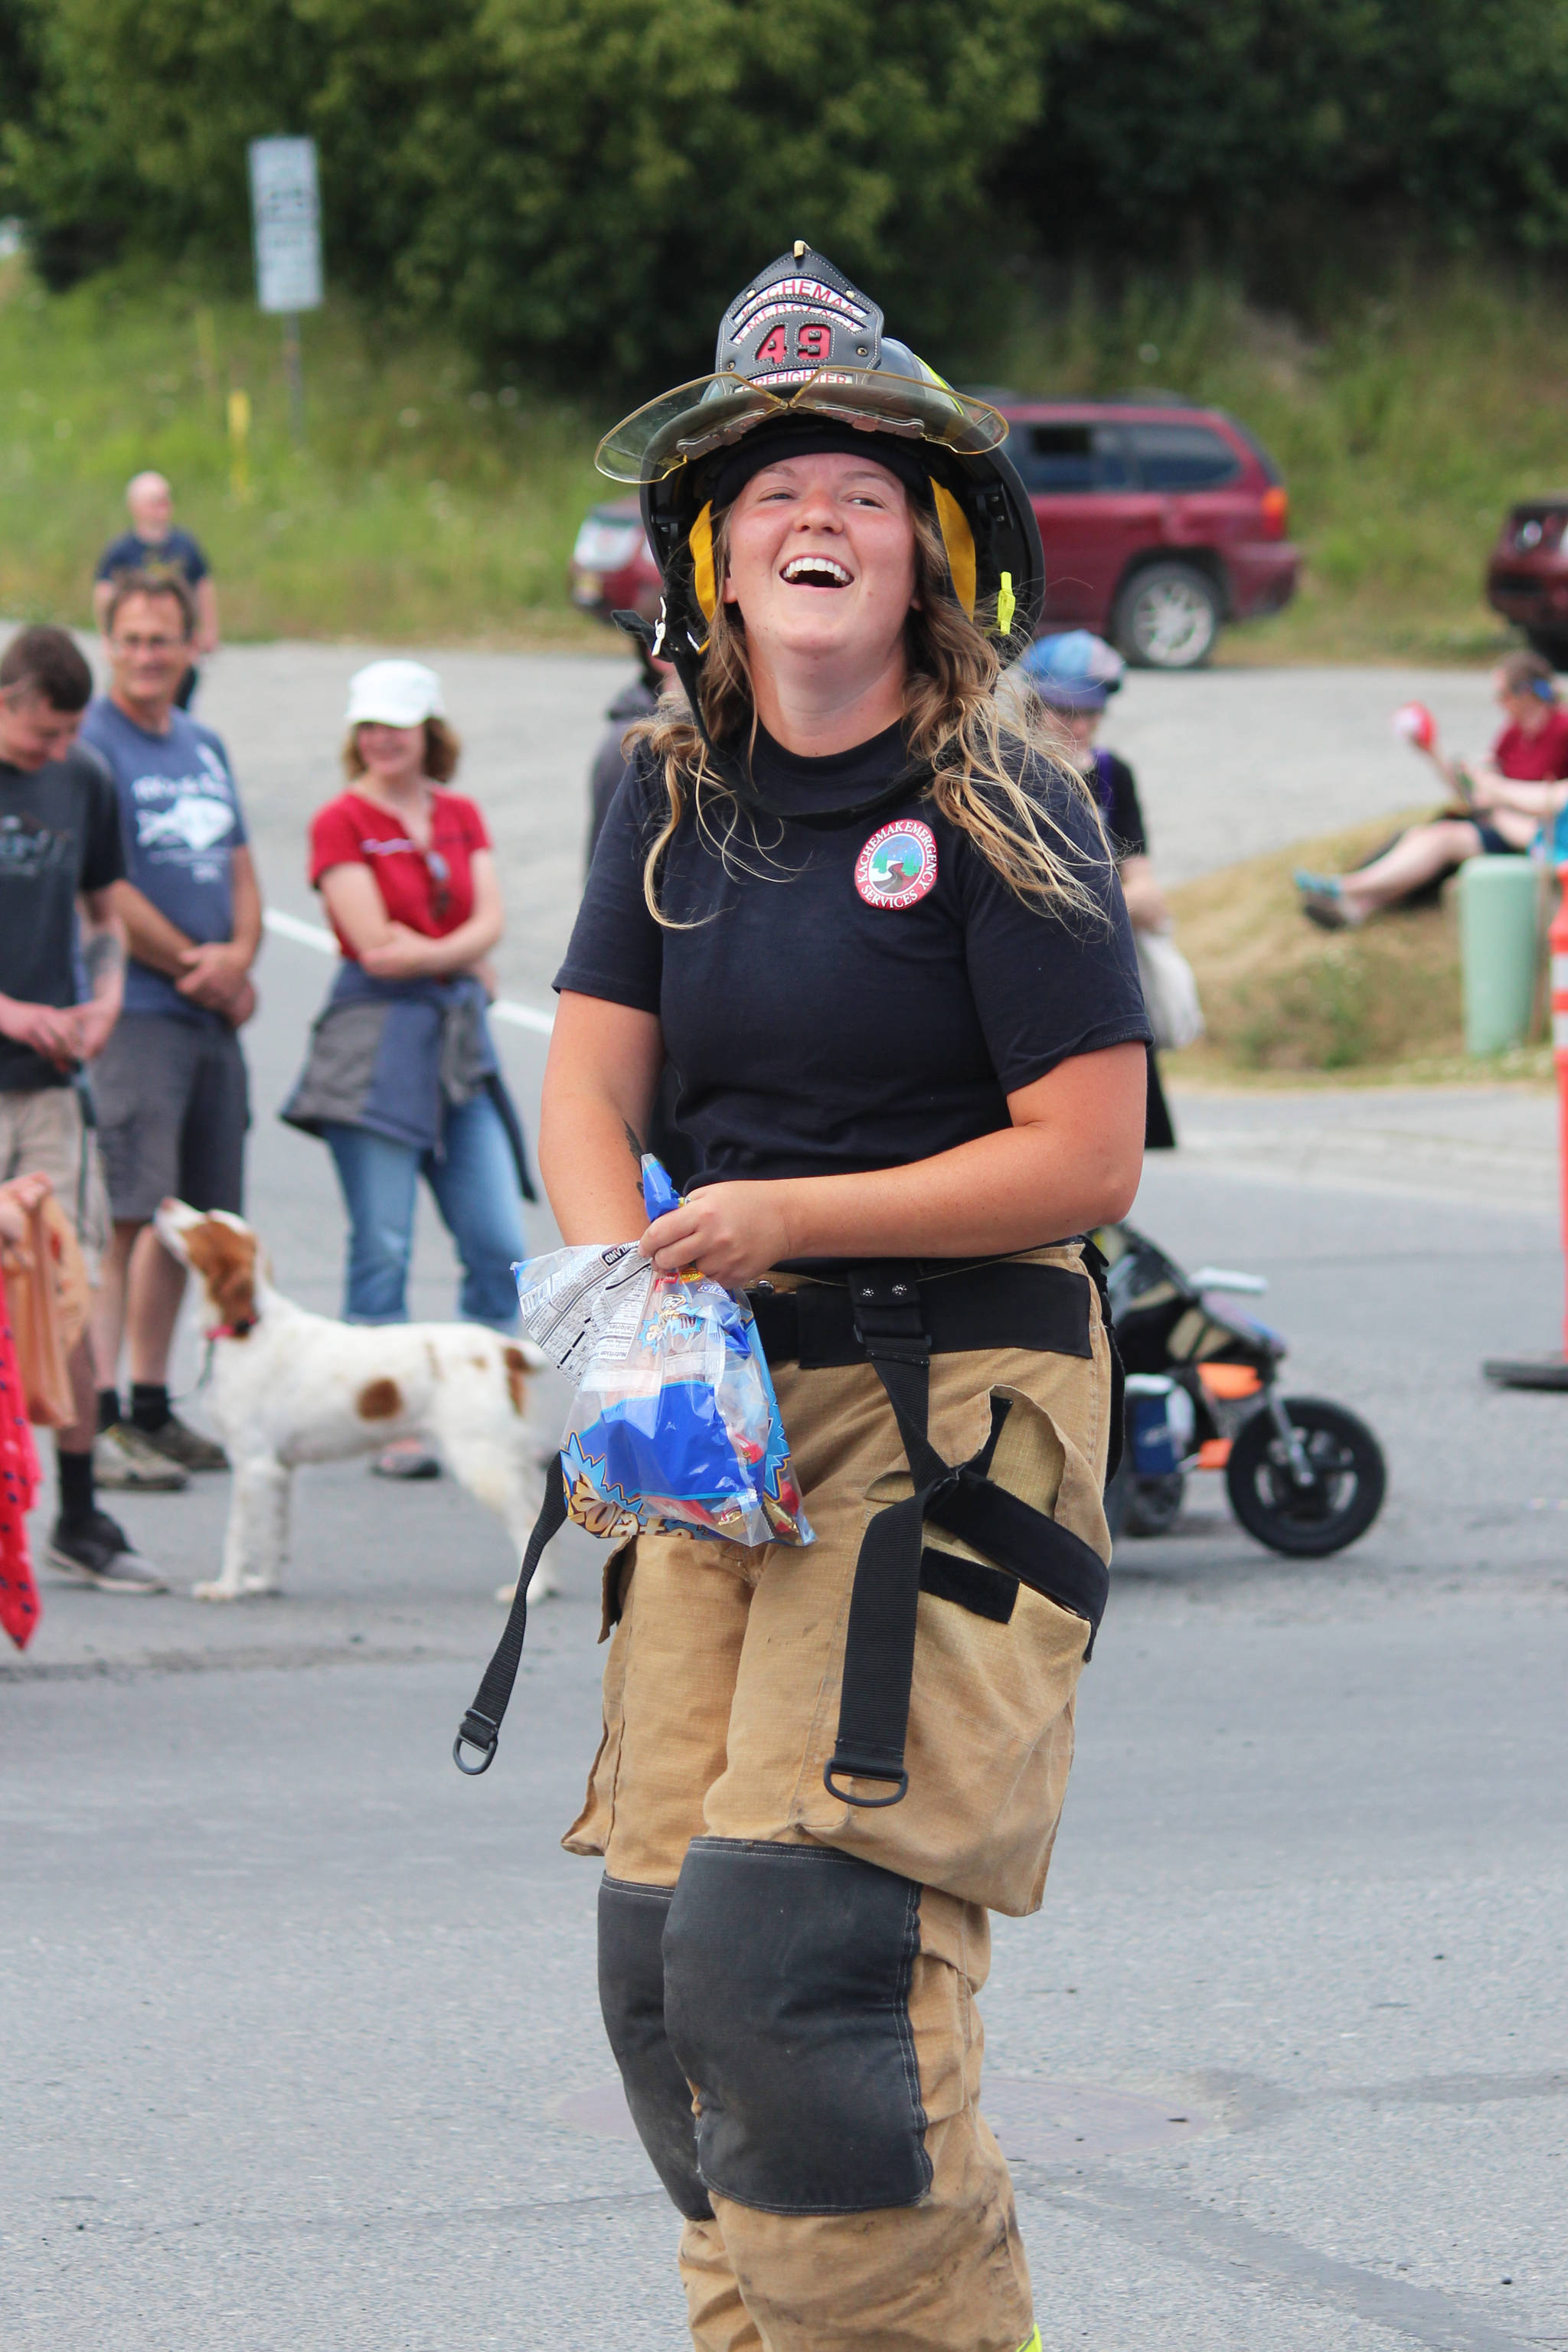 A member of Kachemak Emergency Services smiles as she throws candy to spectators at this year’s July Fourth parade.